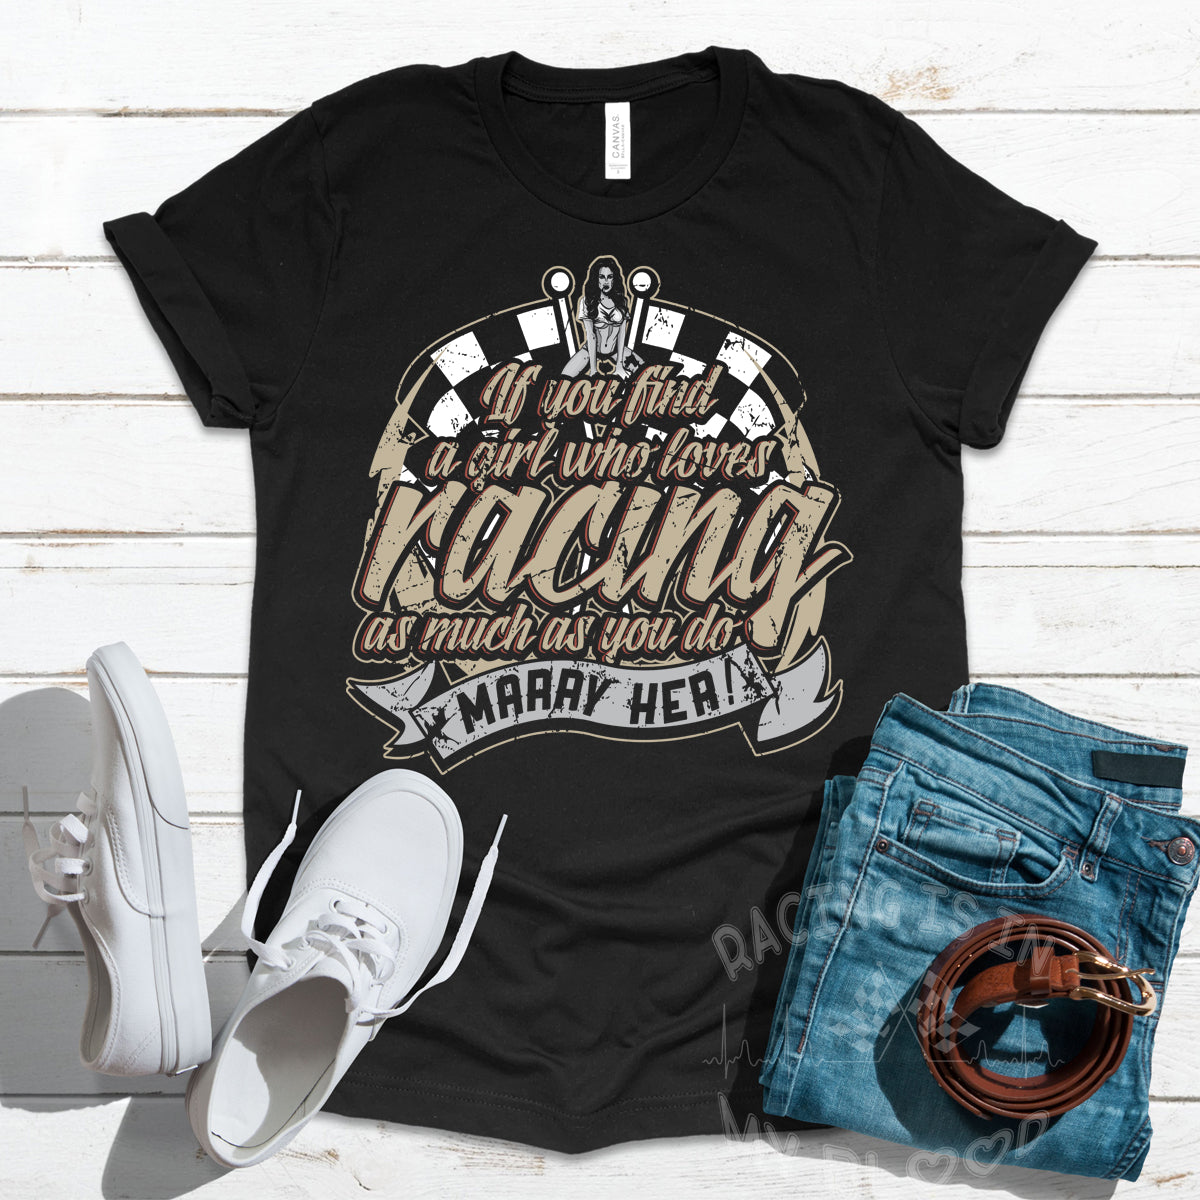 If You Find A Girl Who Loves Racing As Much As You Do Marry Her T-Shirts!